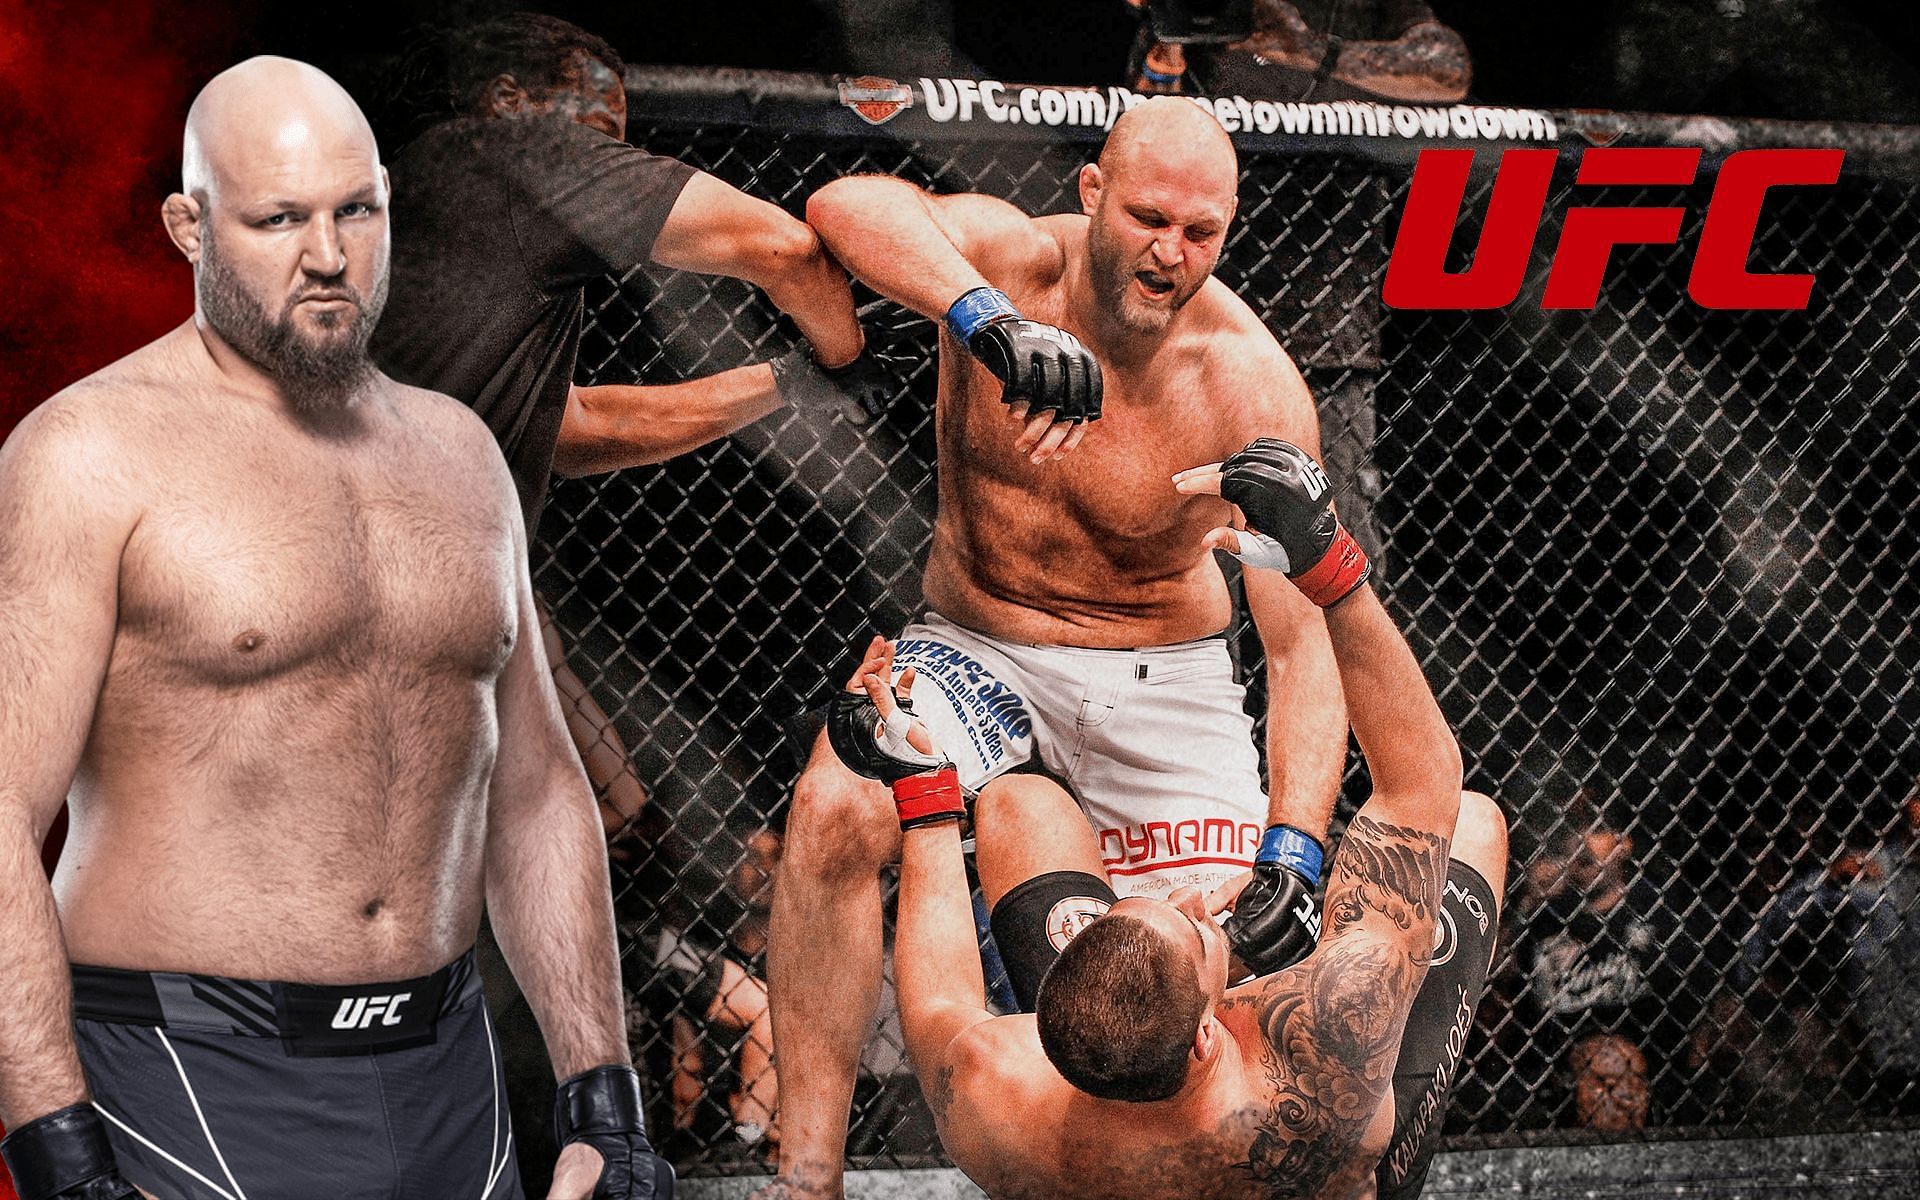 Ben Rothwell (left and centre) [Image of Ben Rothwell courtesy of ufc.com, UFC logo from @ufc on Instagram]